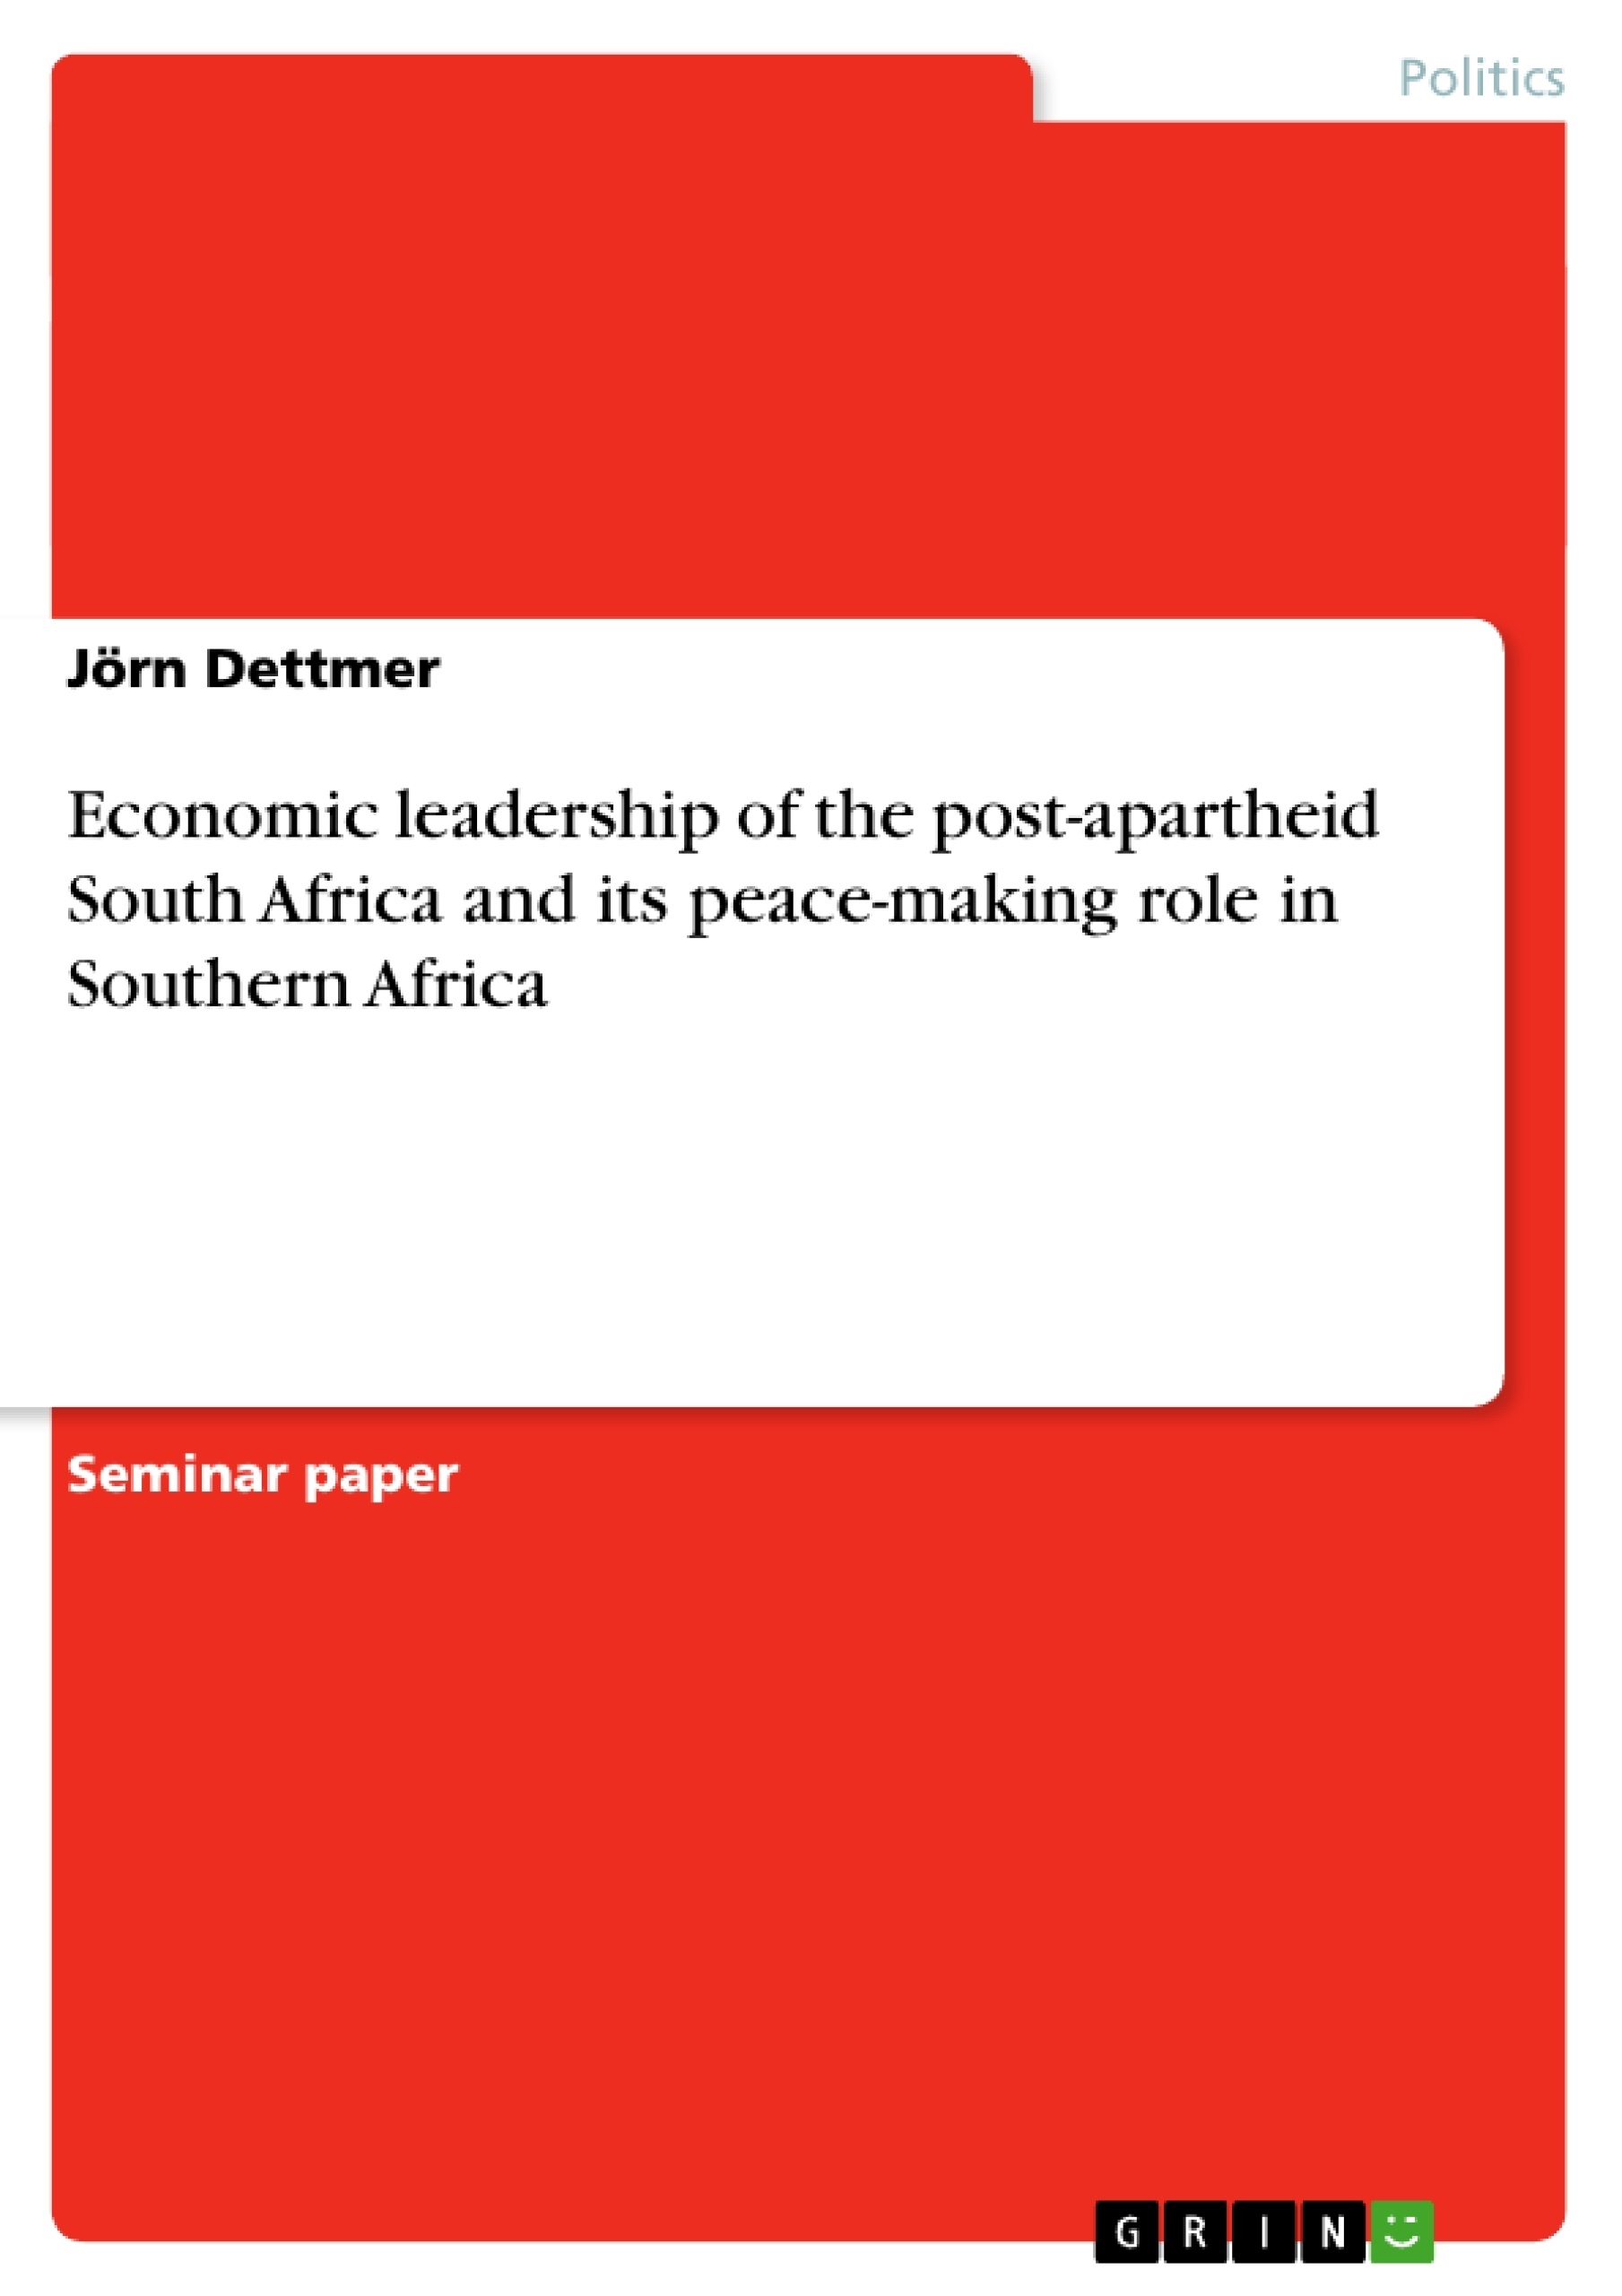 Title: Economic leadership of the post-apartheid South Africa and its peace-making role in Southern Africa